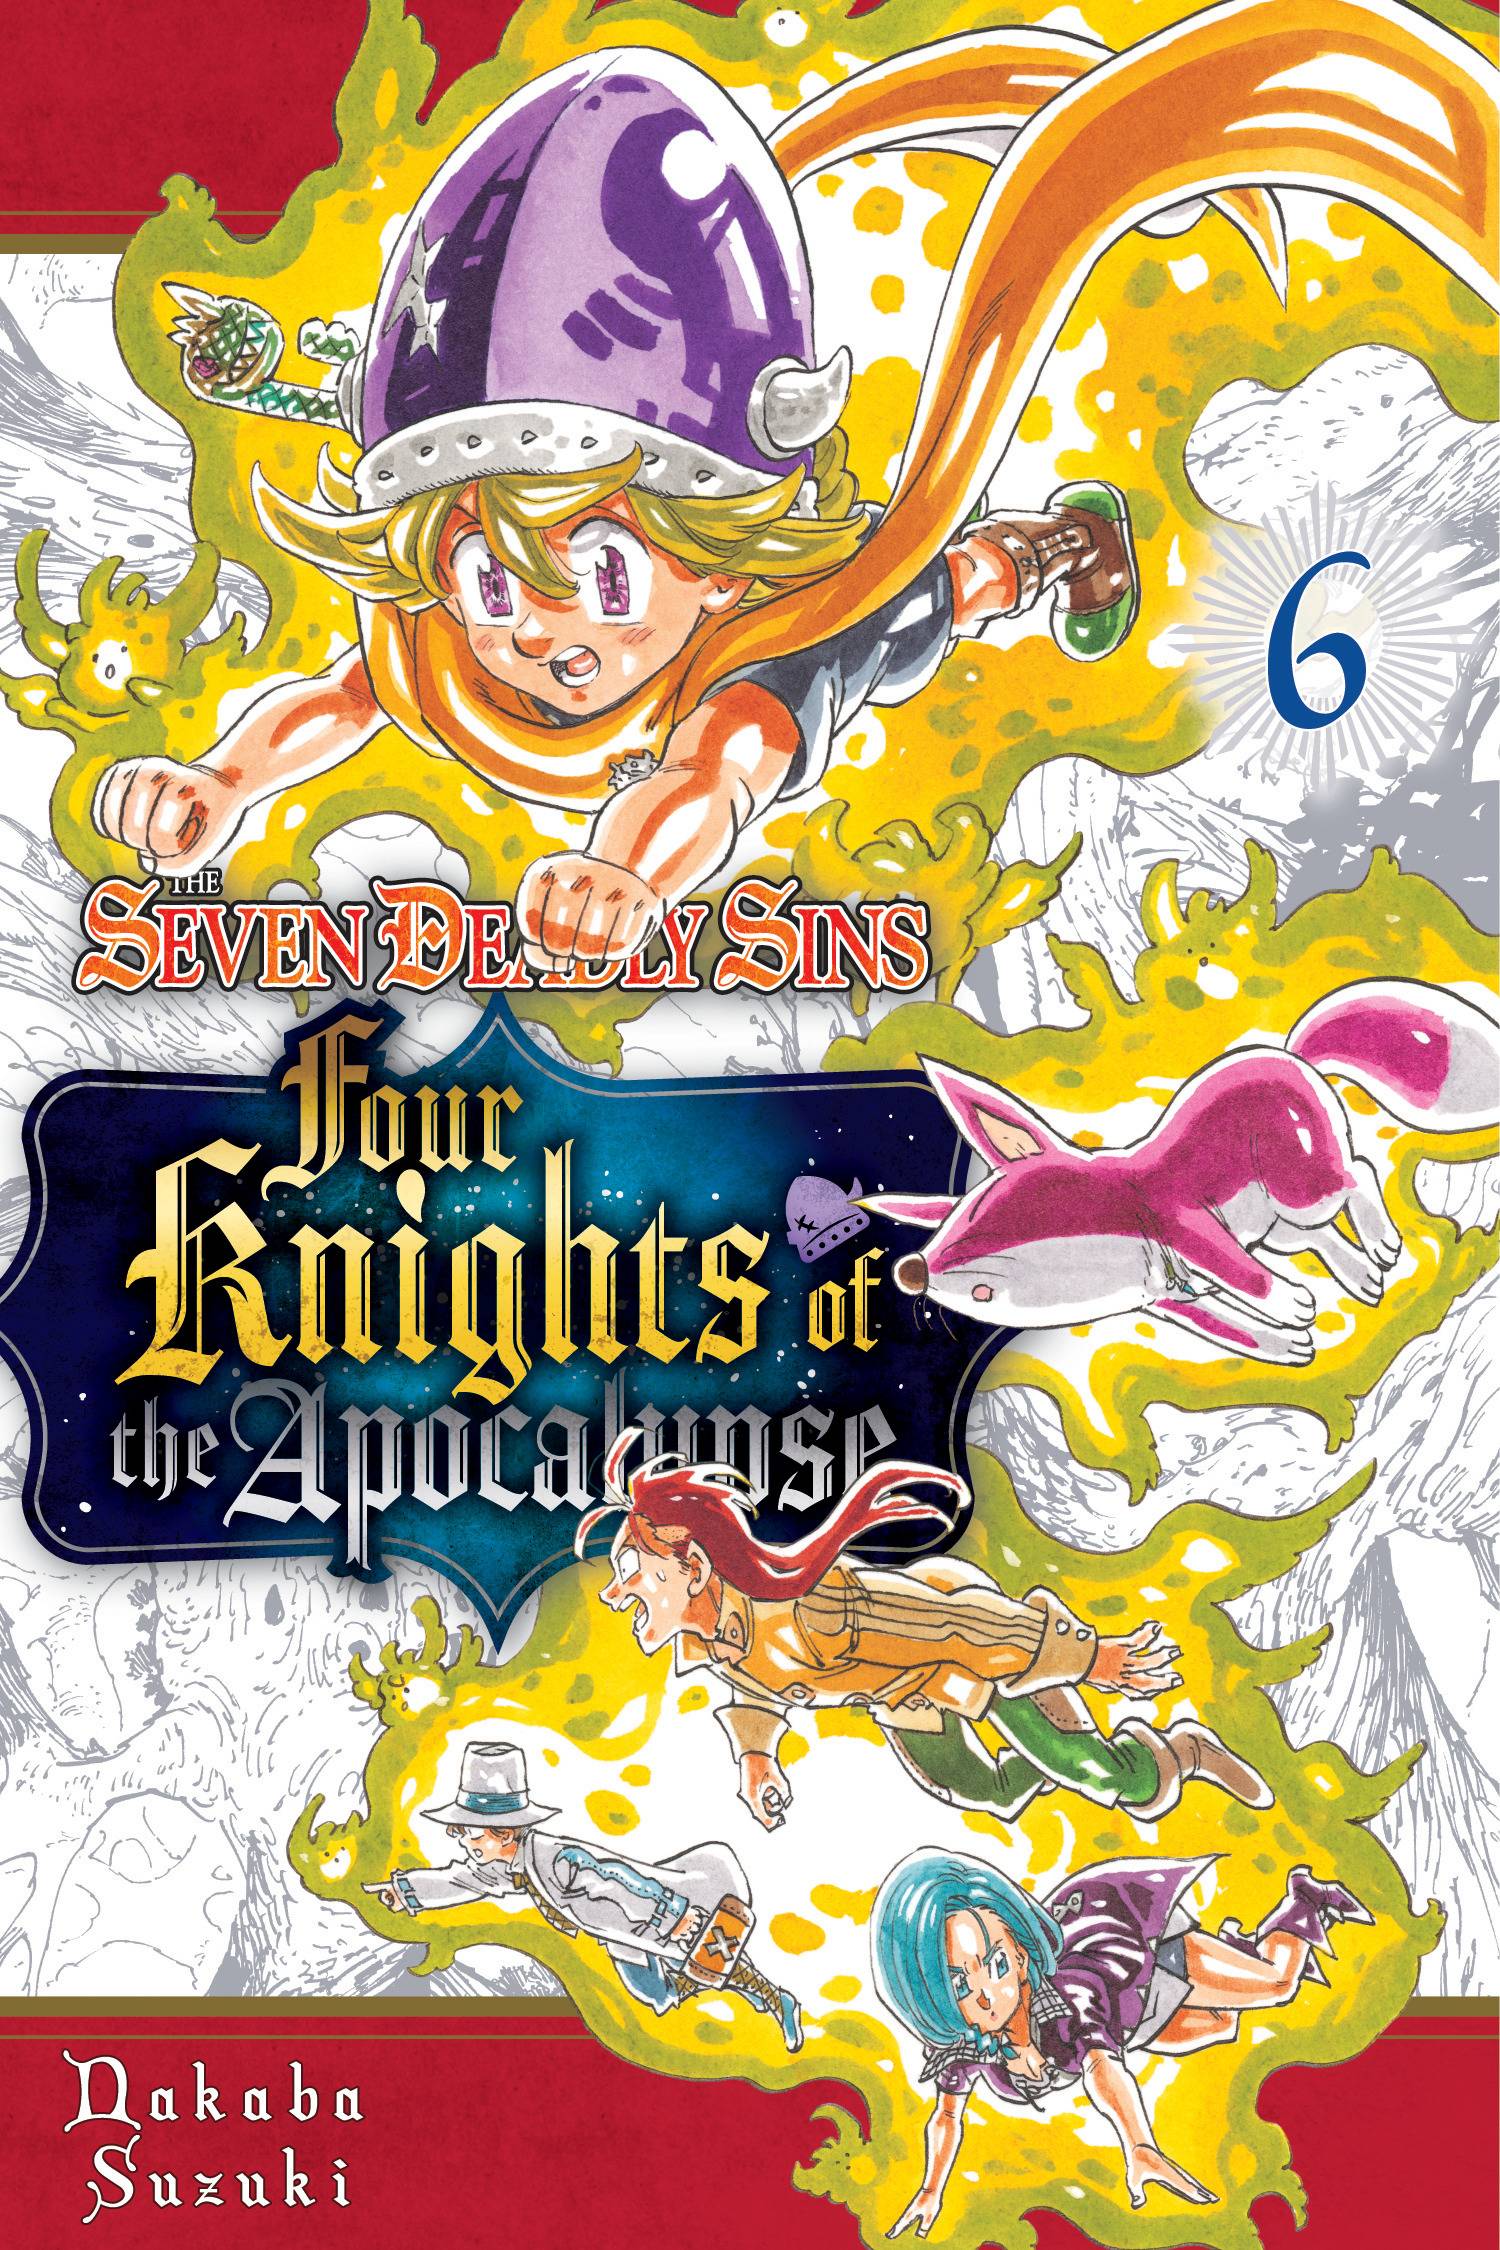 SEVEN DEADLY SINS FOUR KNIGHTS OF APOCALYPSE GN VOL 06